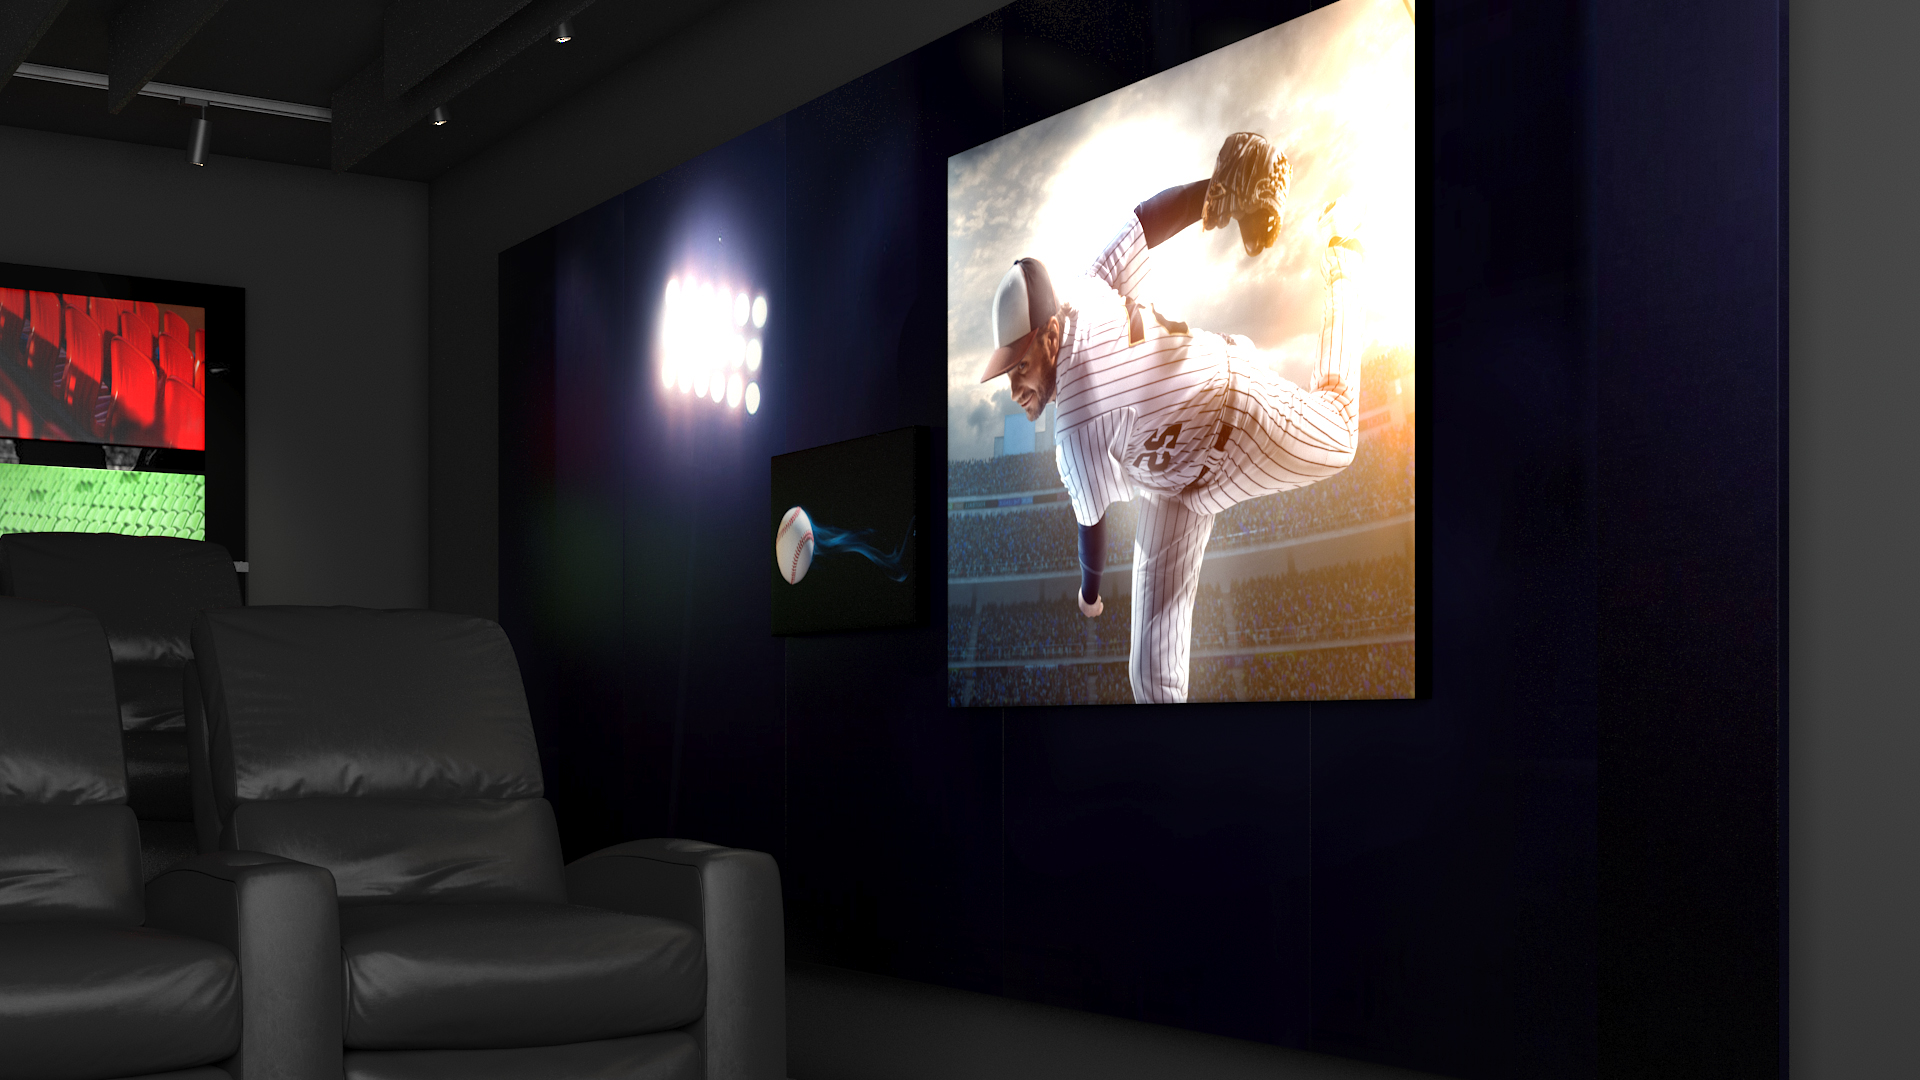 Complete Home Theater Packages